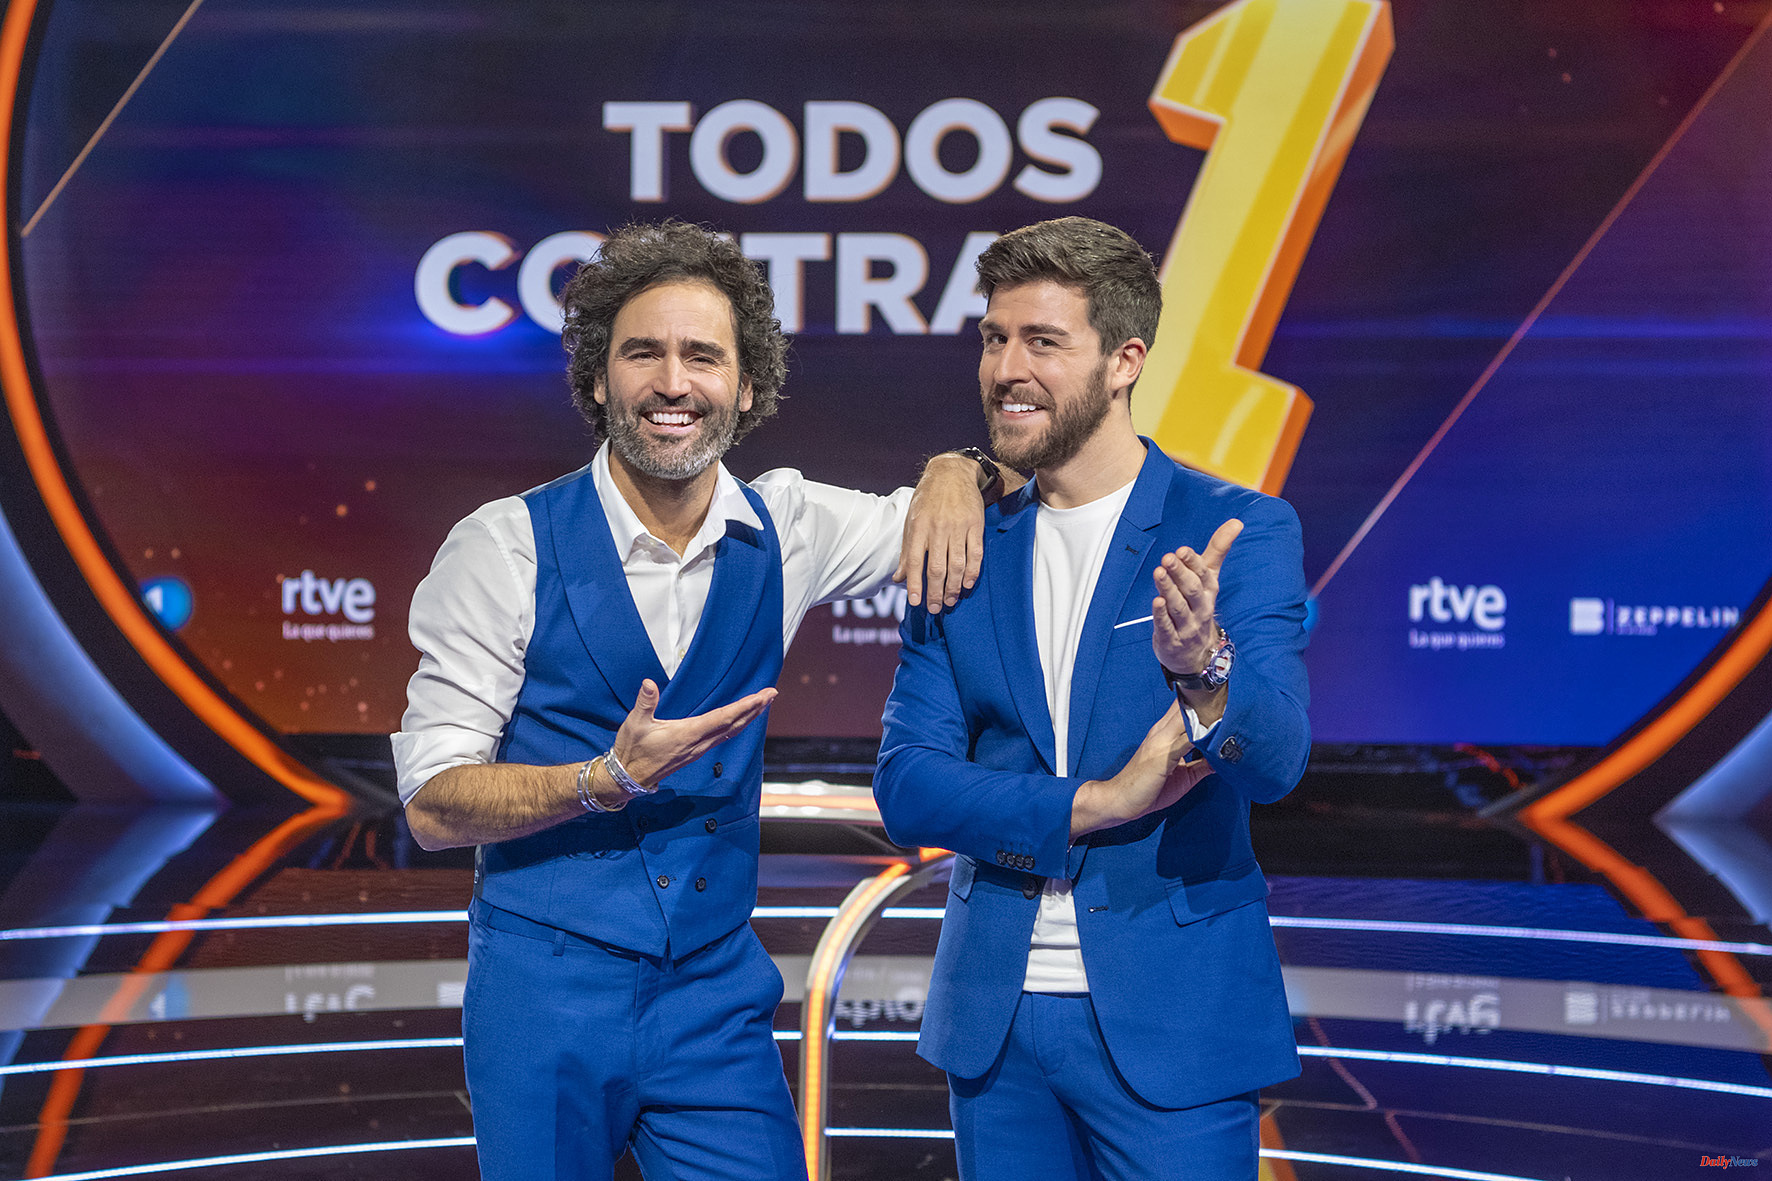 The 1 RTVE cancels Todos contra 1 after dizzying the audience with several failed experiments